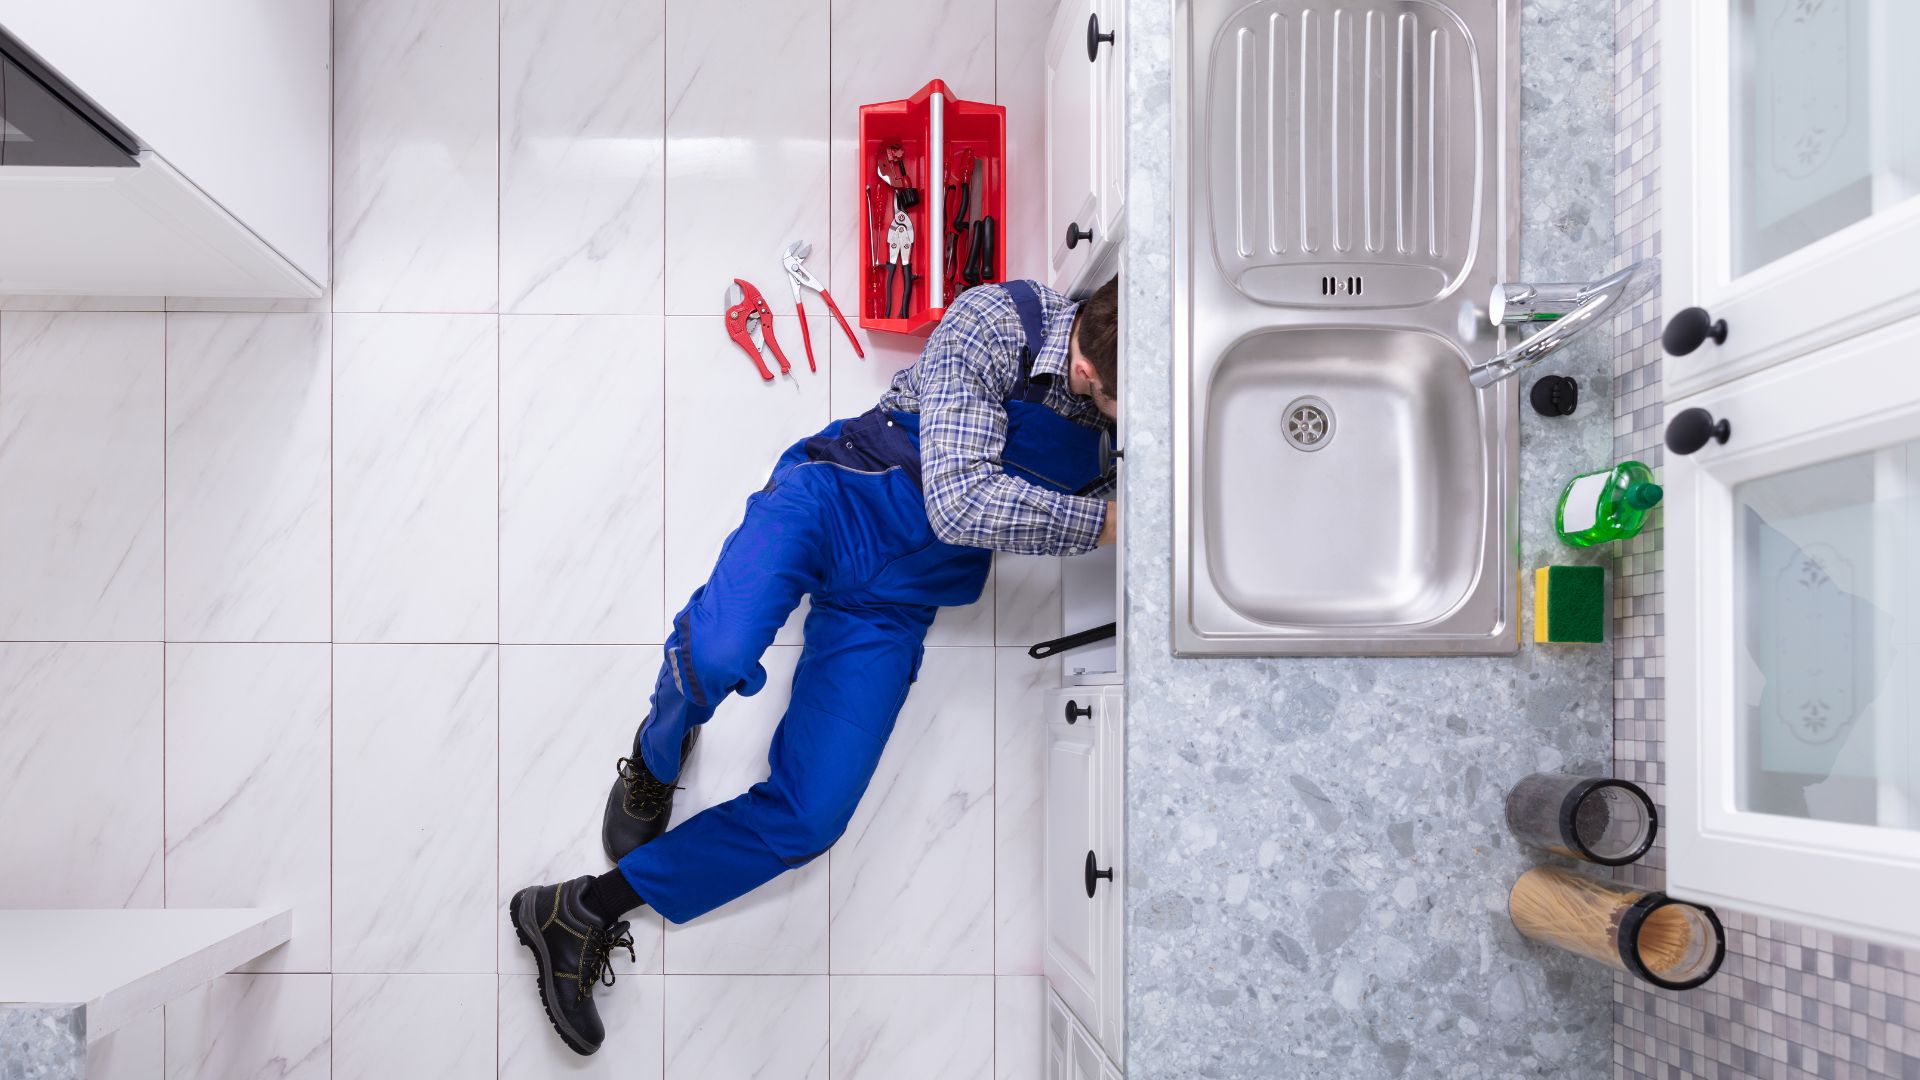 A plumber in overalls lies on the floor fixing pipes under a kitchen sink, with tools scattered nearby.